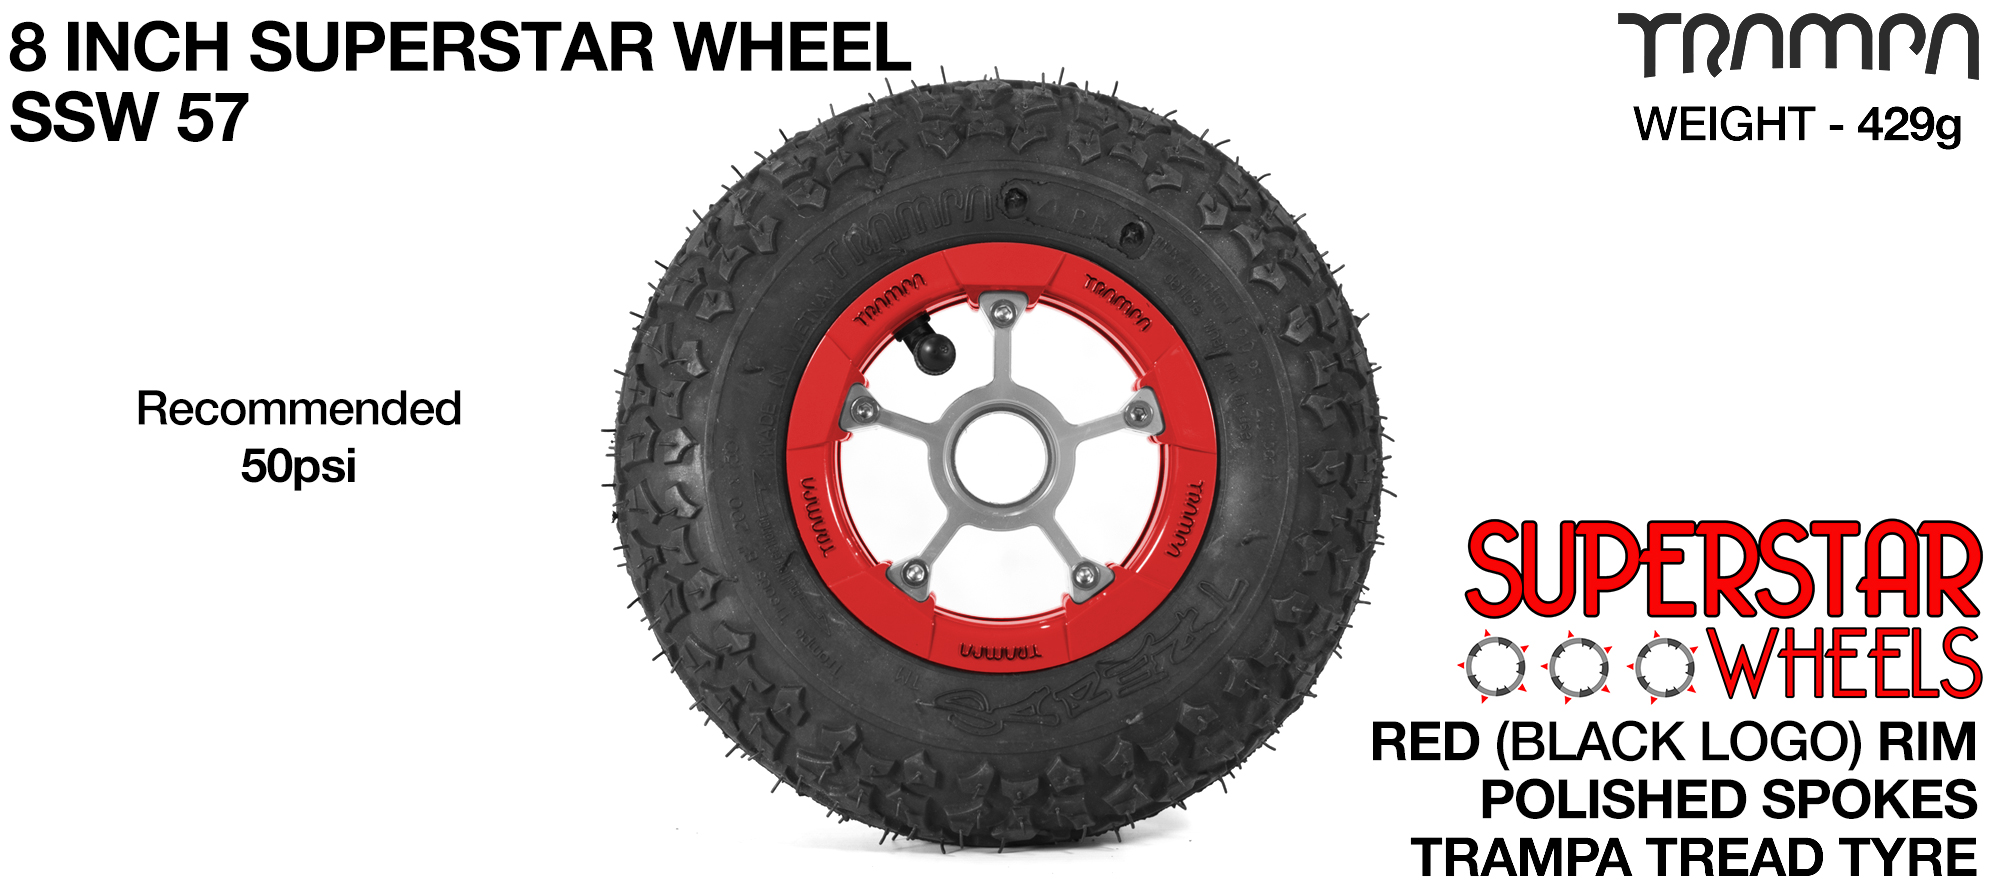 Superstar 8 inch wheel - Red Gloss Rim with Silver Anodised spokes & TRAMPA TREAD 8 Inch Tyres